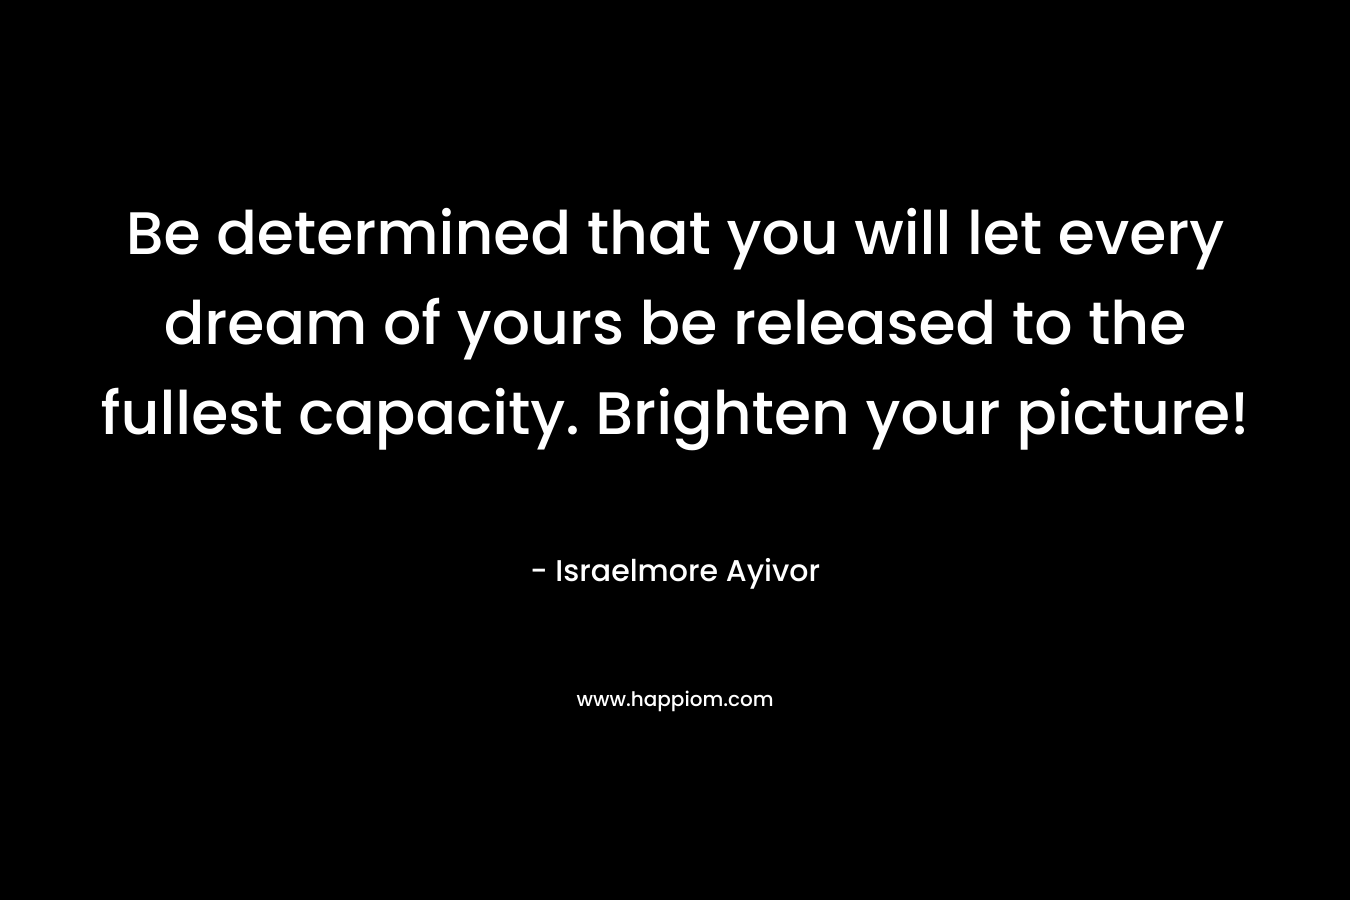 Be determined that you will let every dream of yours be released to the fullest capacity. Brighten your picture! – Israelmore Ayivor